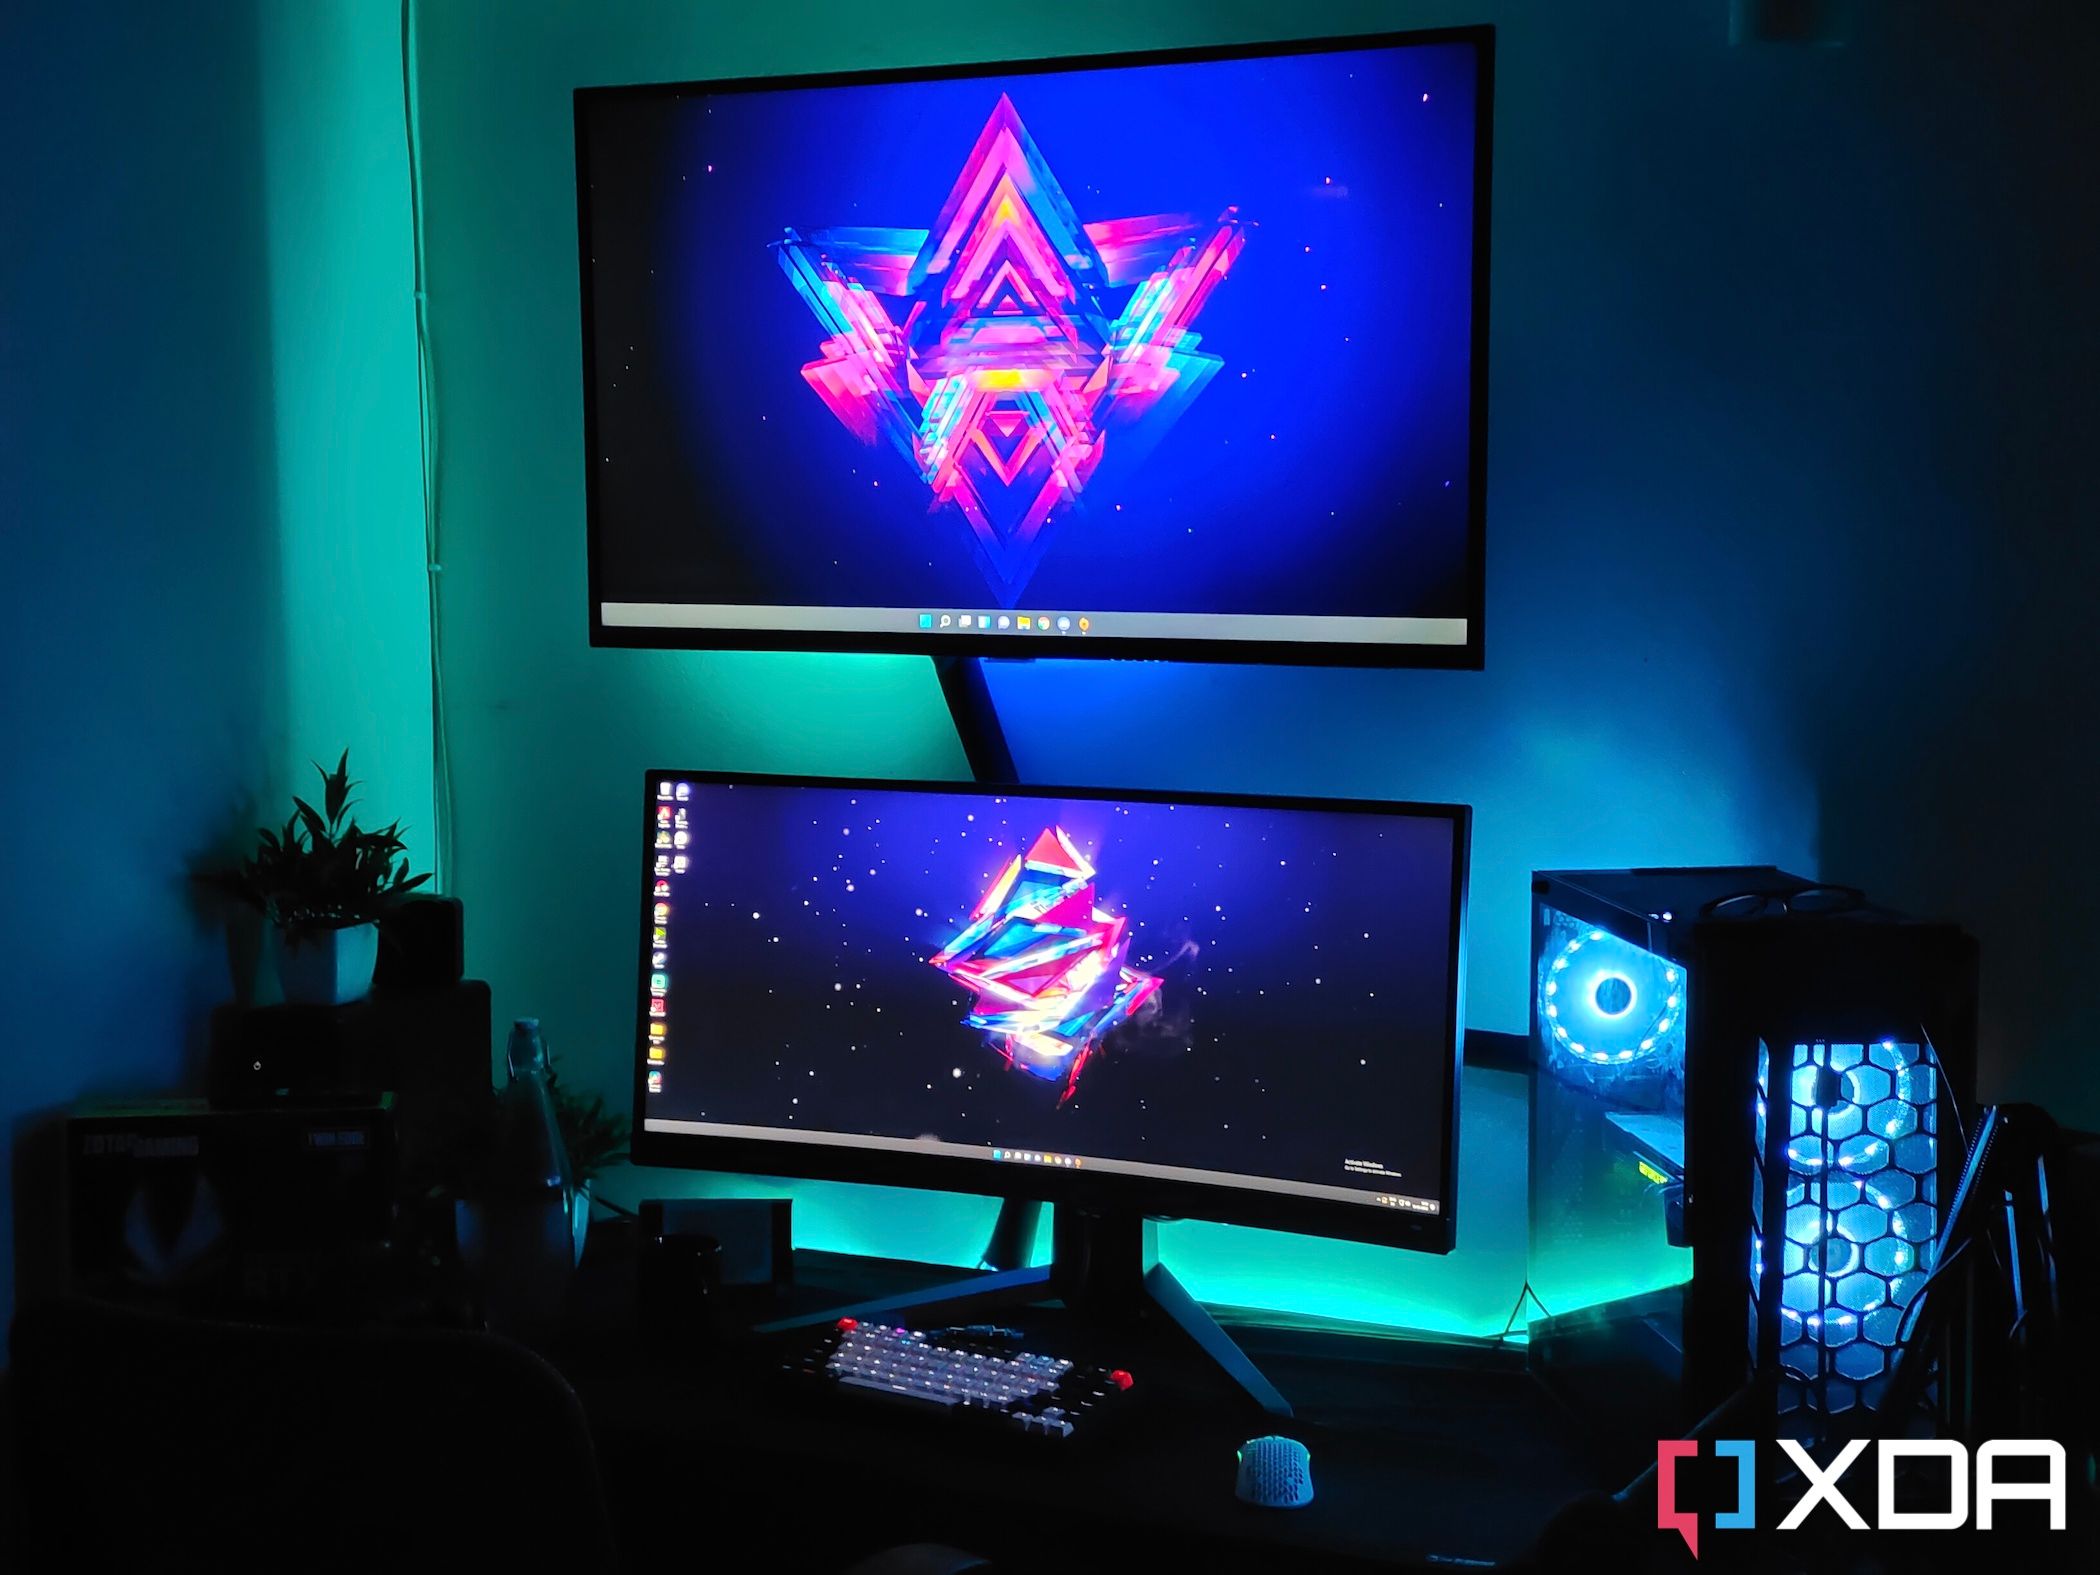 An image showing a gaming setup with a TV, monitor, and a gaming PC case on a desk with some RGB lights.